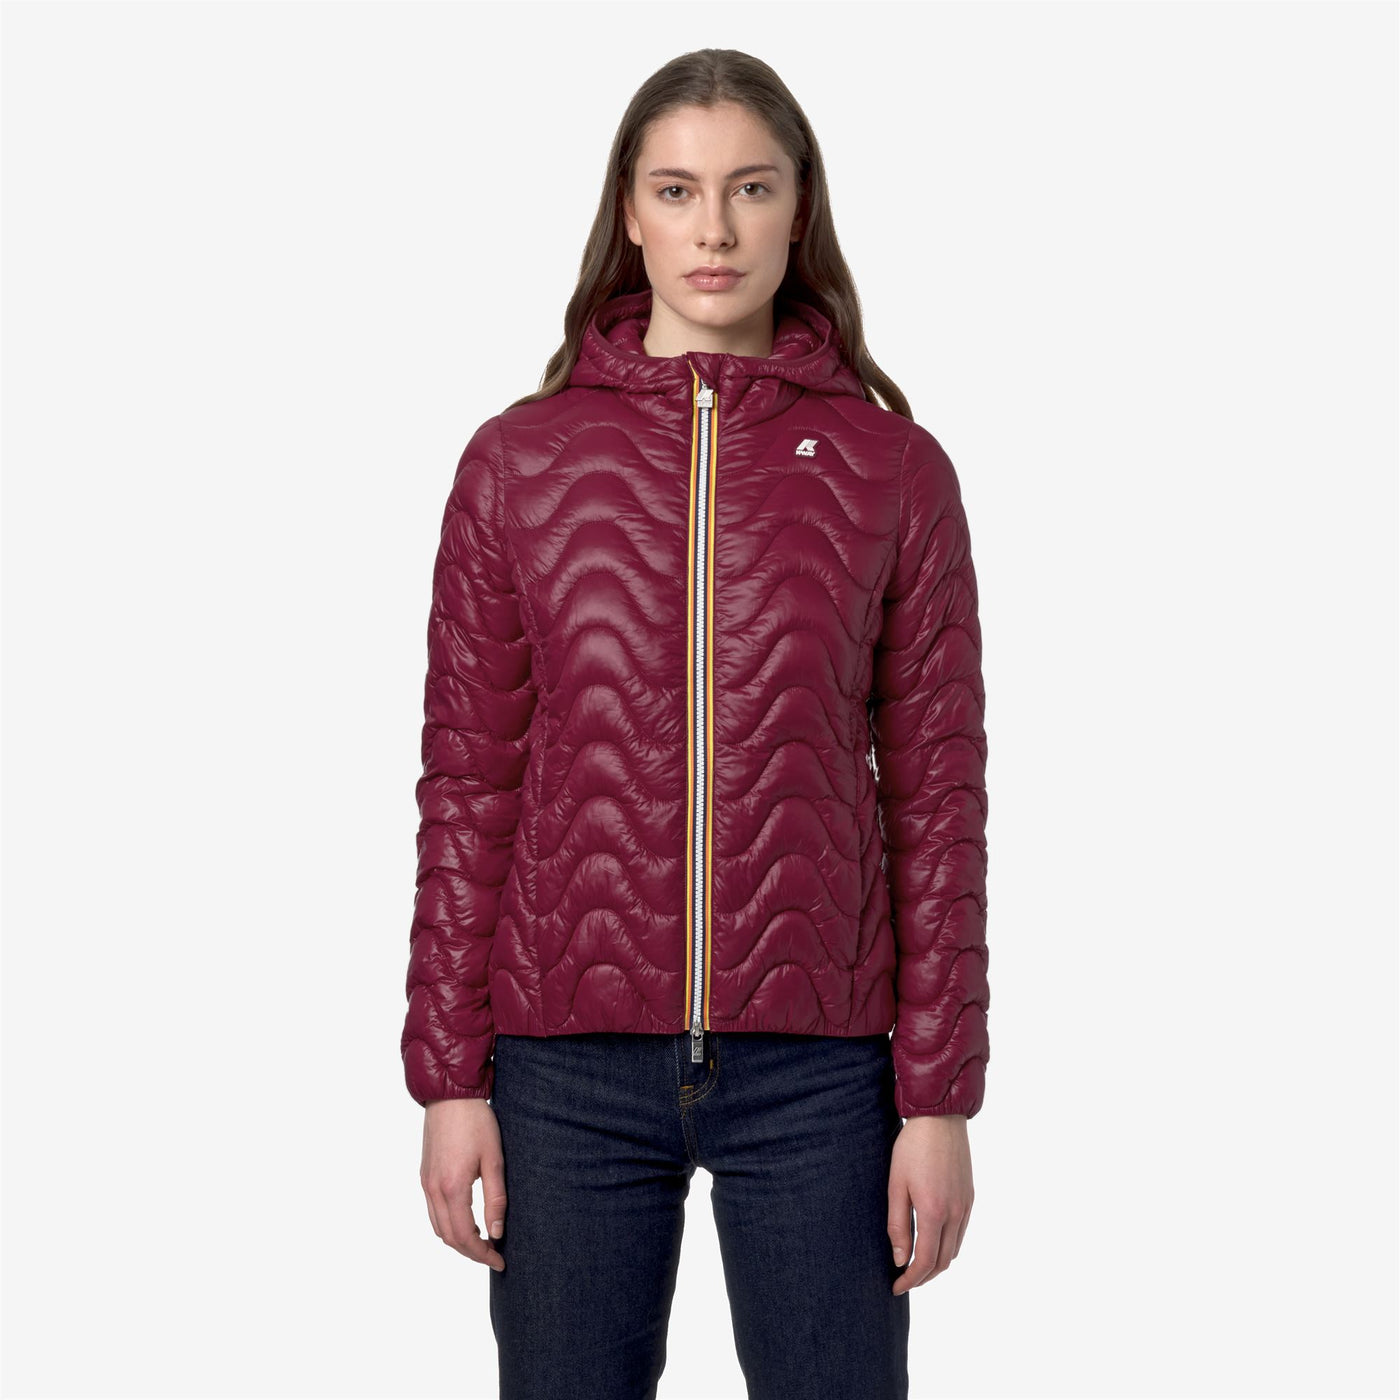 Jackets Woman LILY QUILTED WARM Short RED DK Dressed Back (jpg Rgb)		